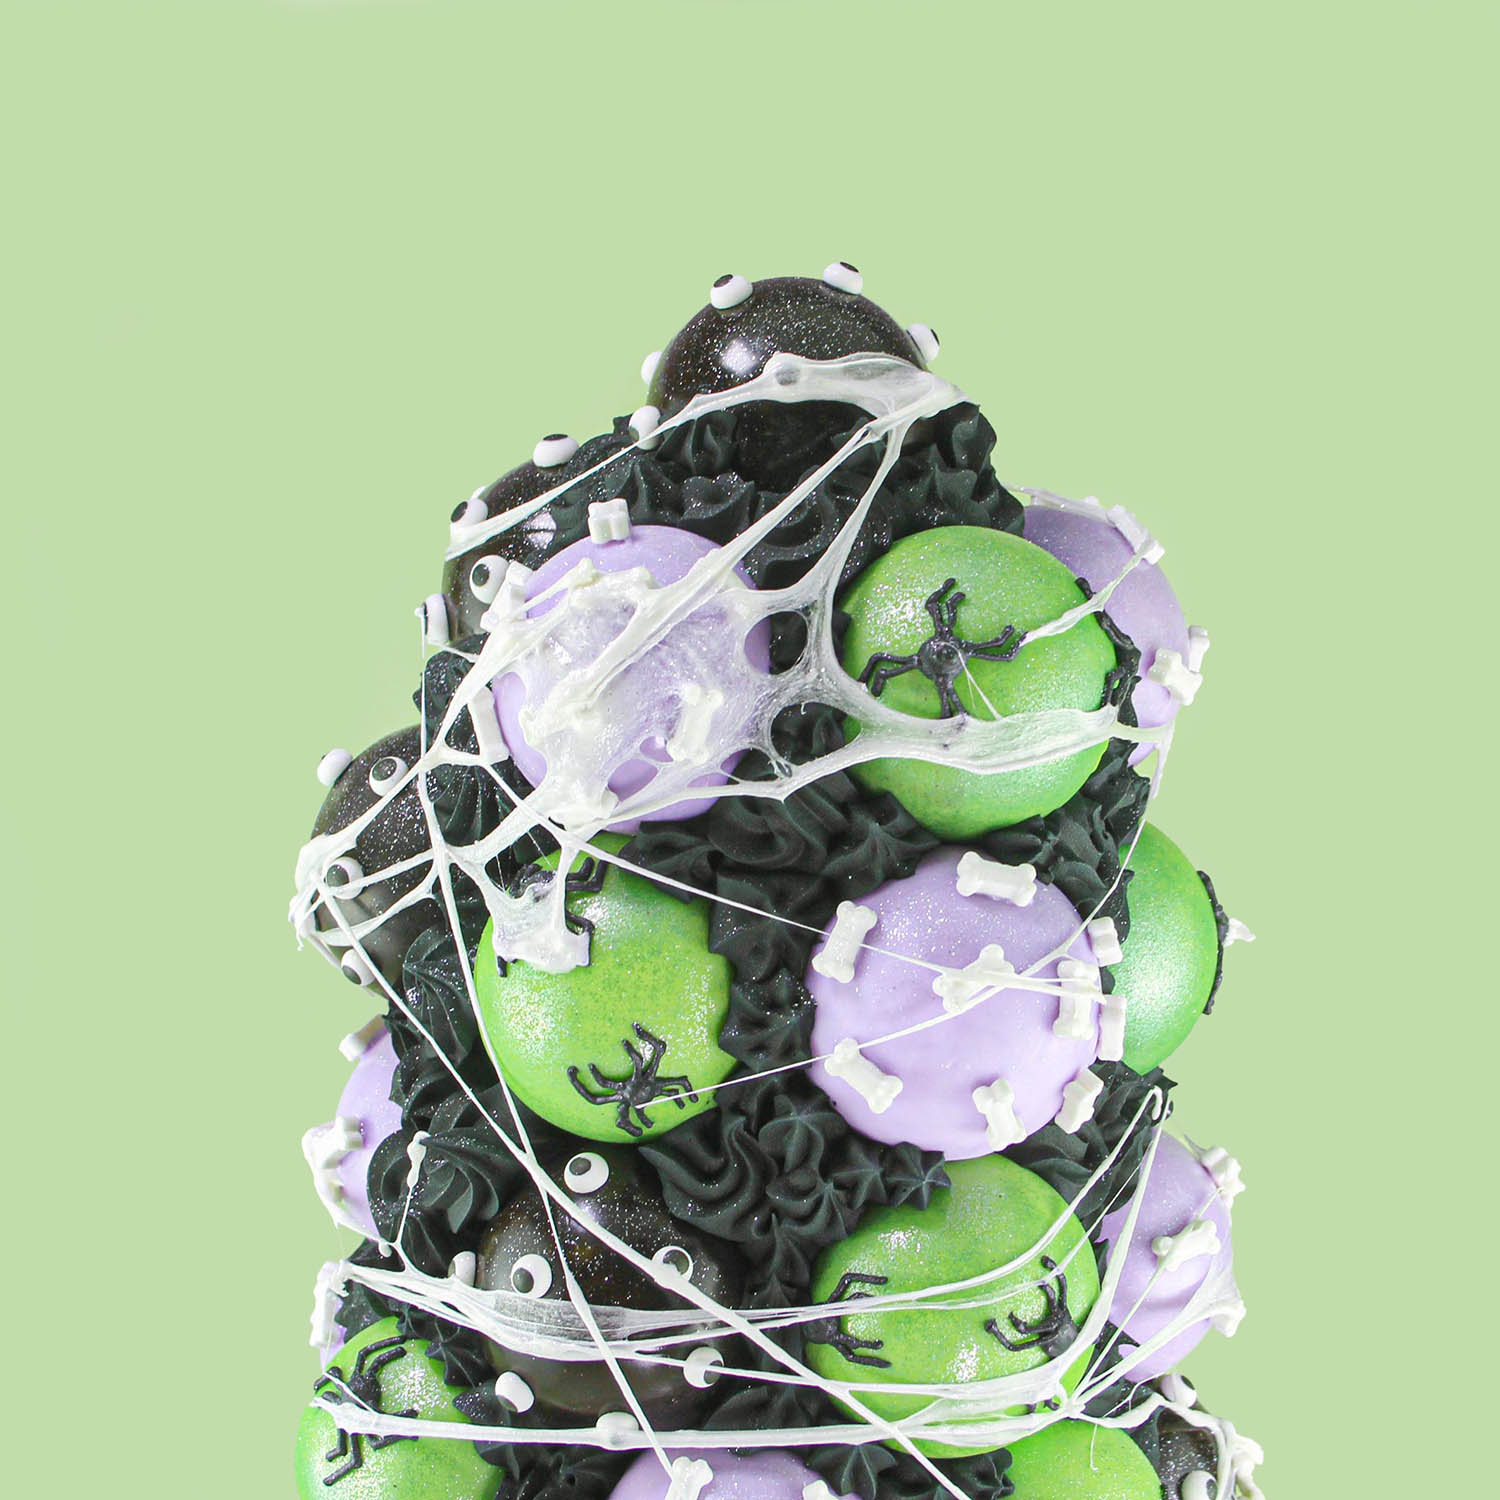 Top of the Cake pop tower with black cake balls with beady eyes, green cake balls with hand piped spiders and purple cake balls with candy bones covered under a marshmallow web.